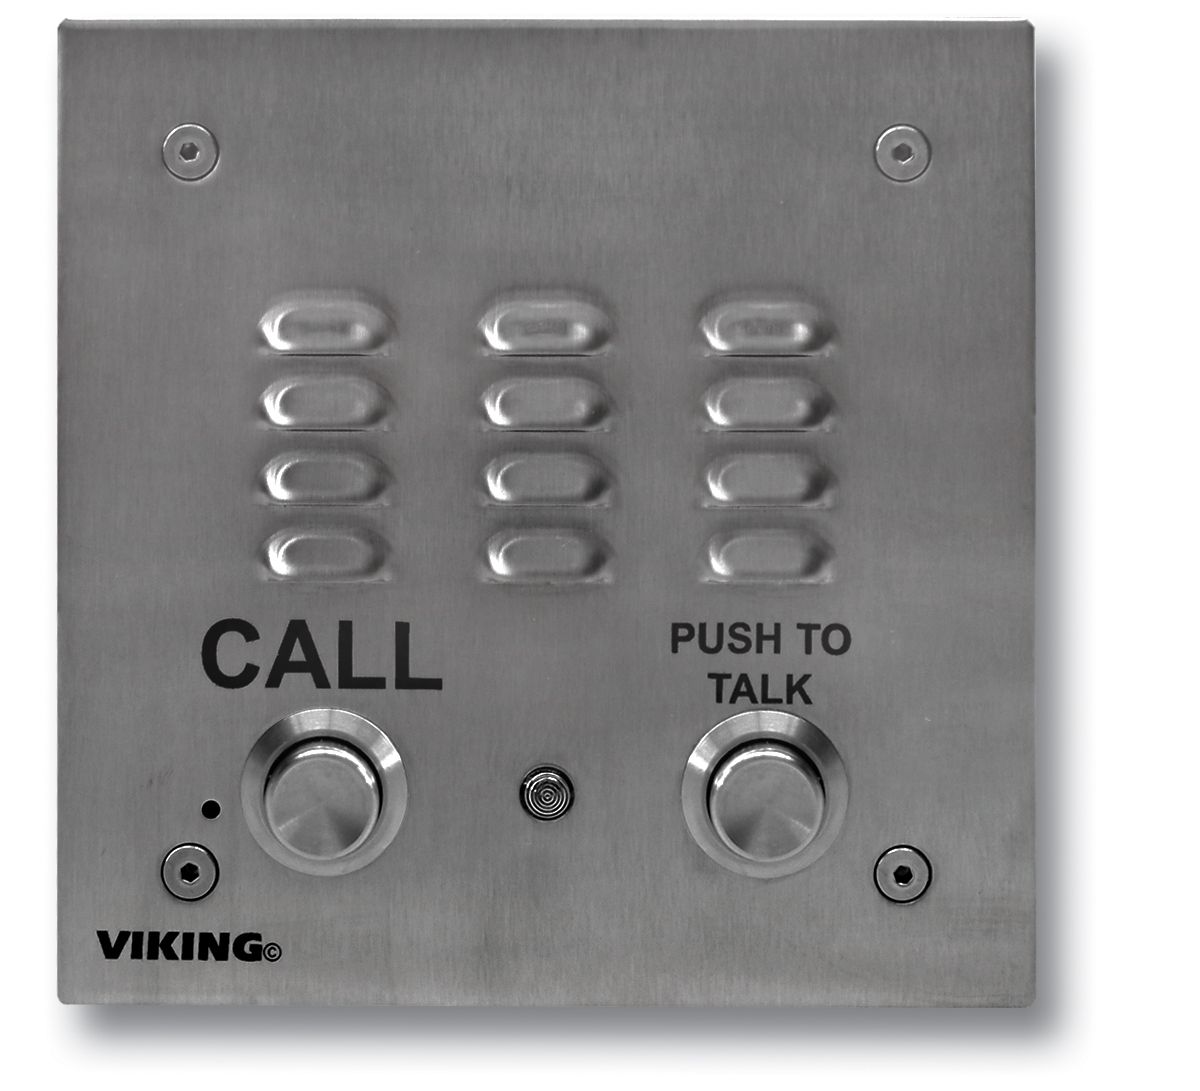 Viking Electronics Stainless Steel Handsfree Phone with Dialer and Push-To-Talk Button E-30-PT - The Telecom Spot